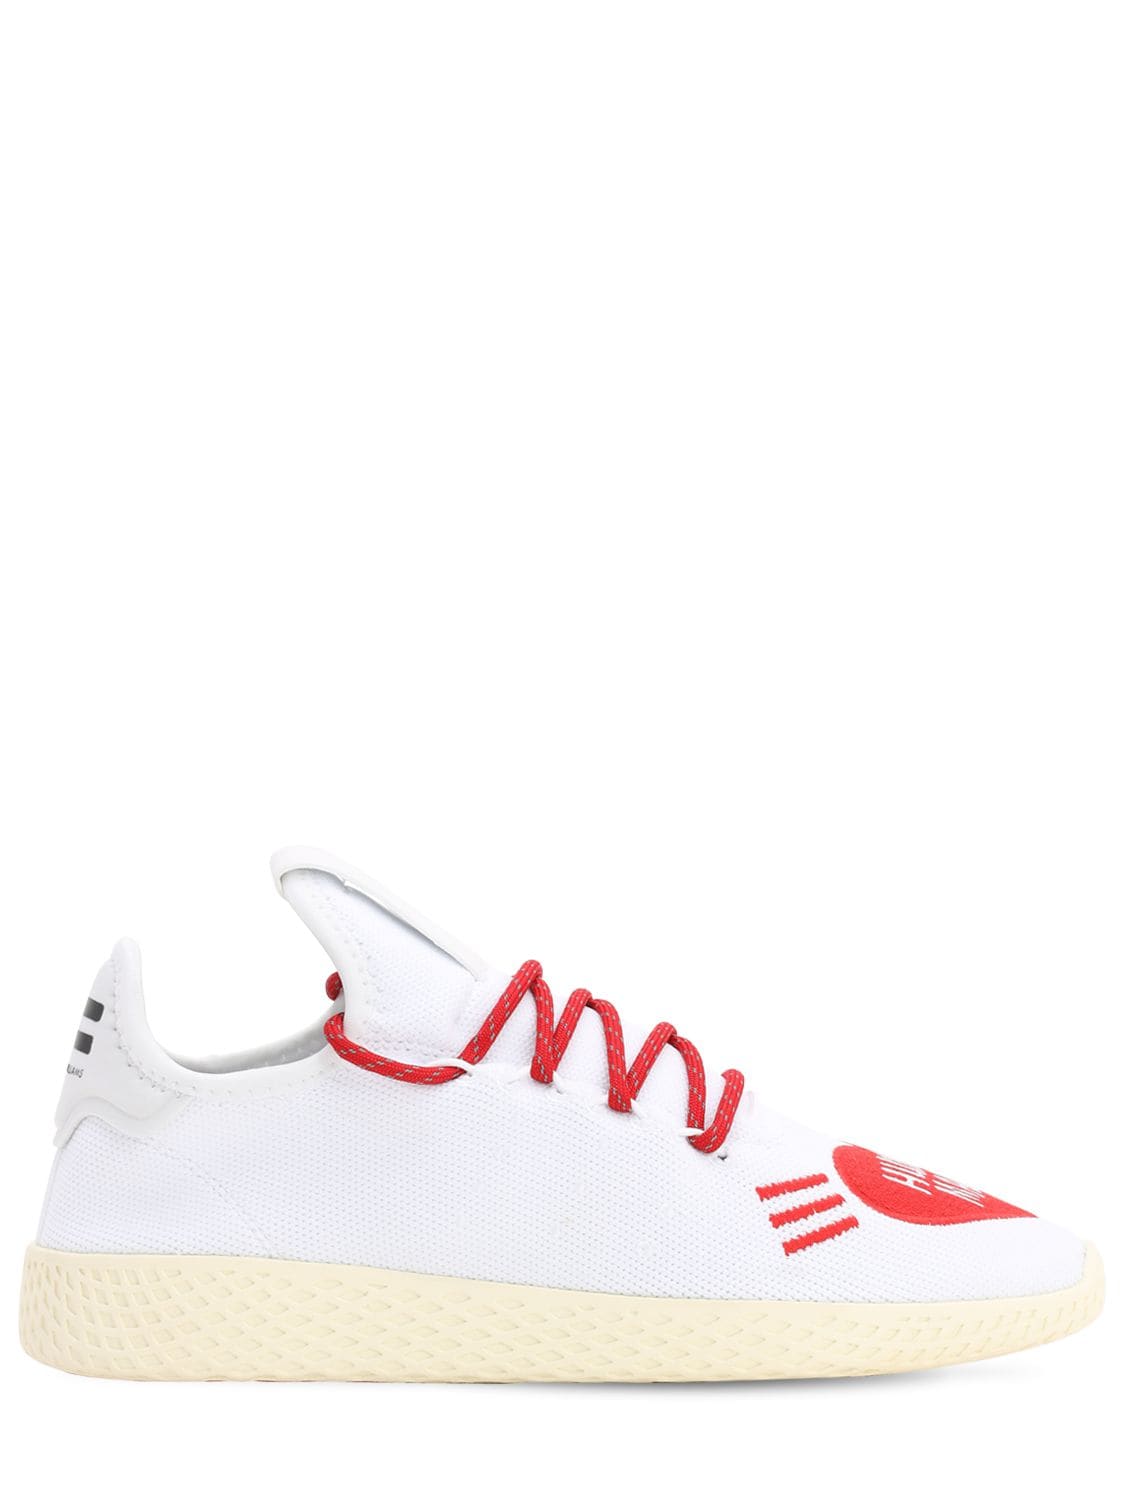 Adidas Originals By Pharrell Williams Tennis Hu Human Made Sneakers In White